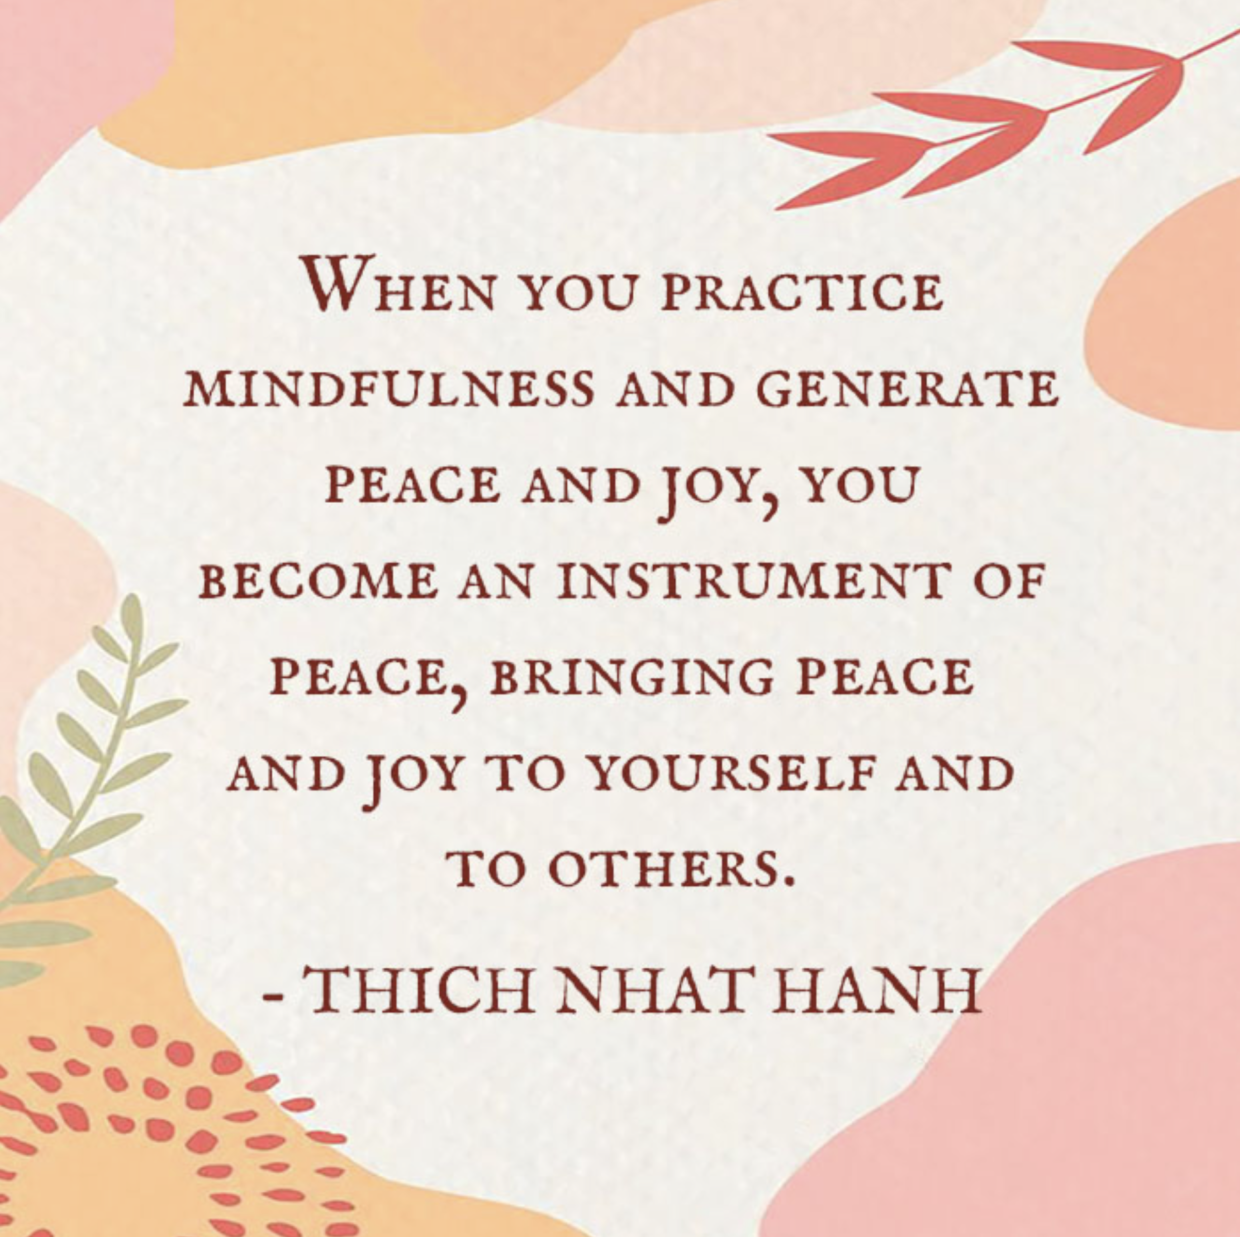 Peace and Joy - THich Nhat Hanh